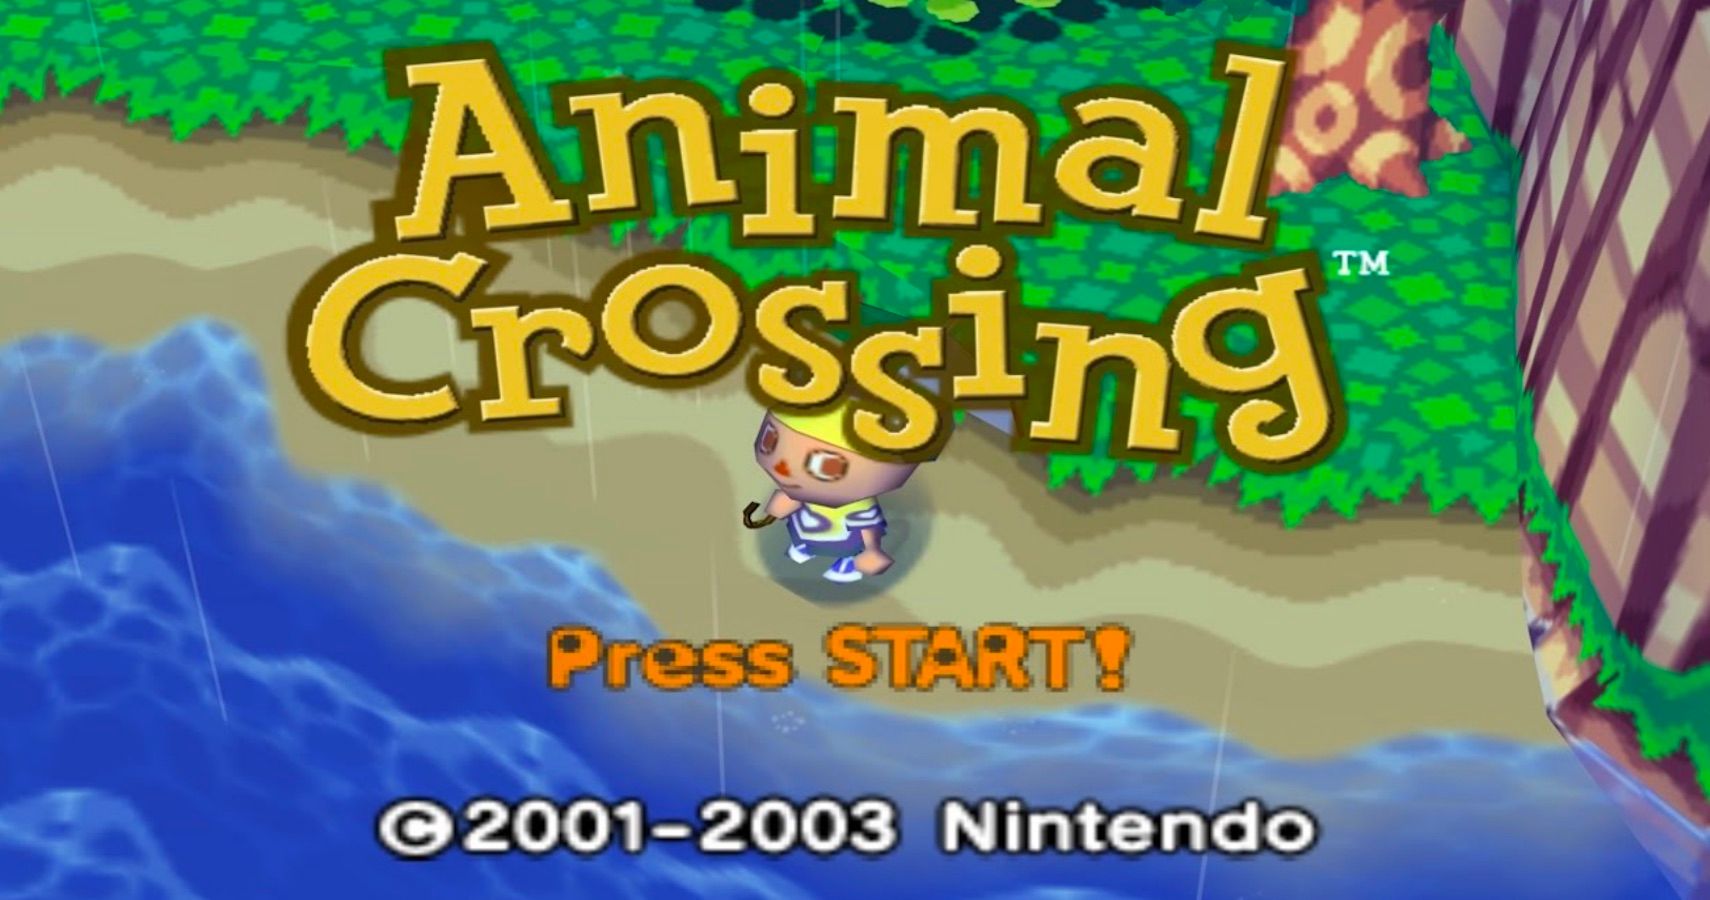 Nintendos Treatment Of Animal Crossing Is Stuck In The Early 2000s